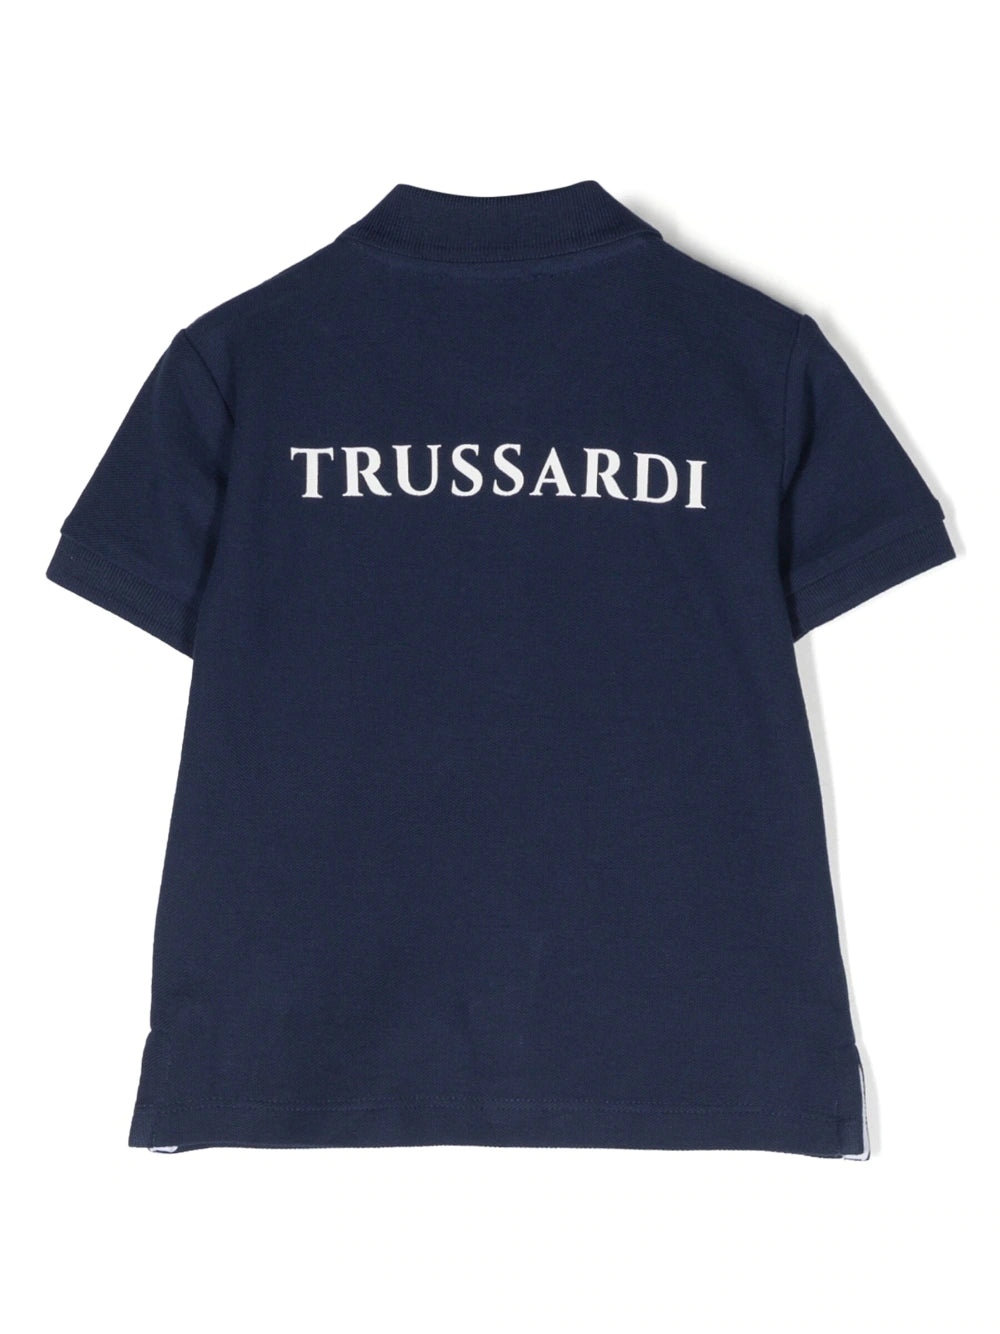 Trussardi Acutto Polo Shirt (2 Colors Available)